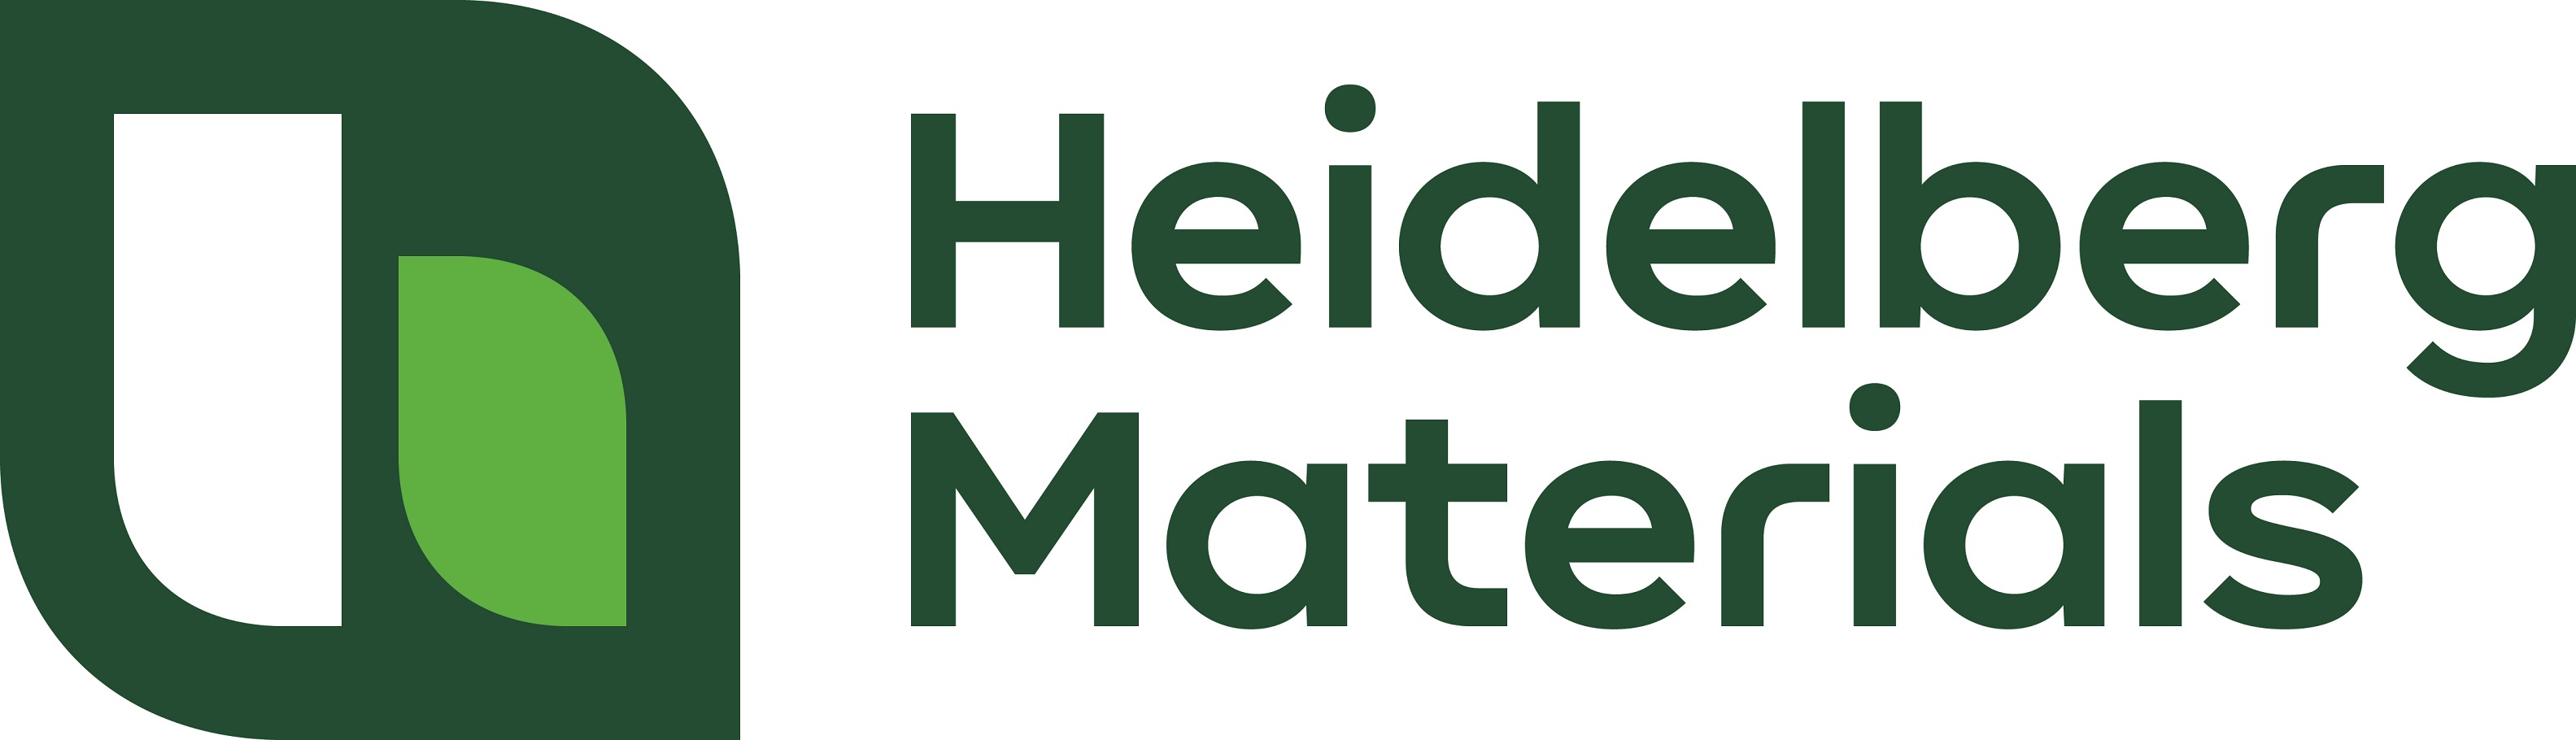 Heidelberg Materials says the acquisition is part of its strategy to strengthen its existing businesses through bolt-on acquisitions